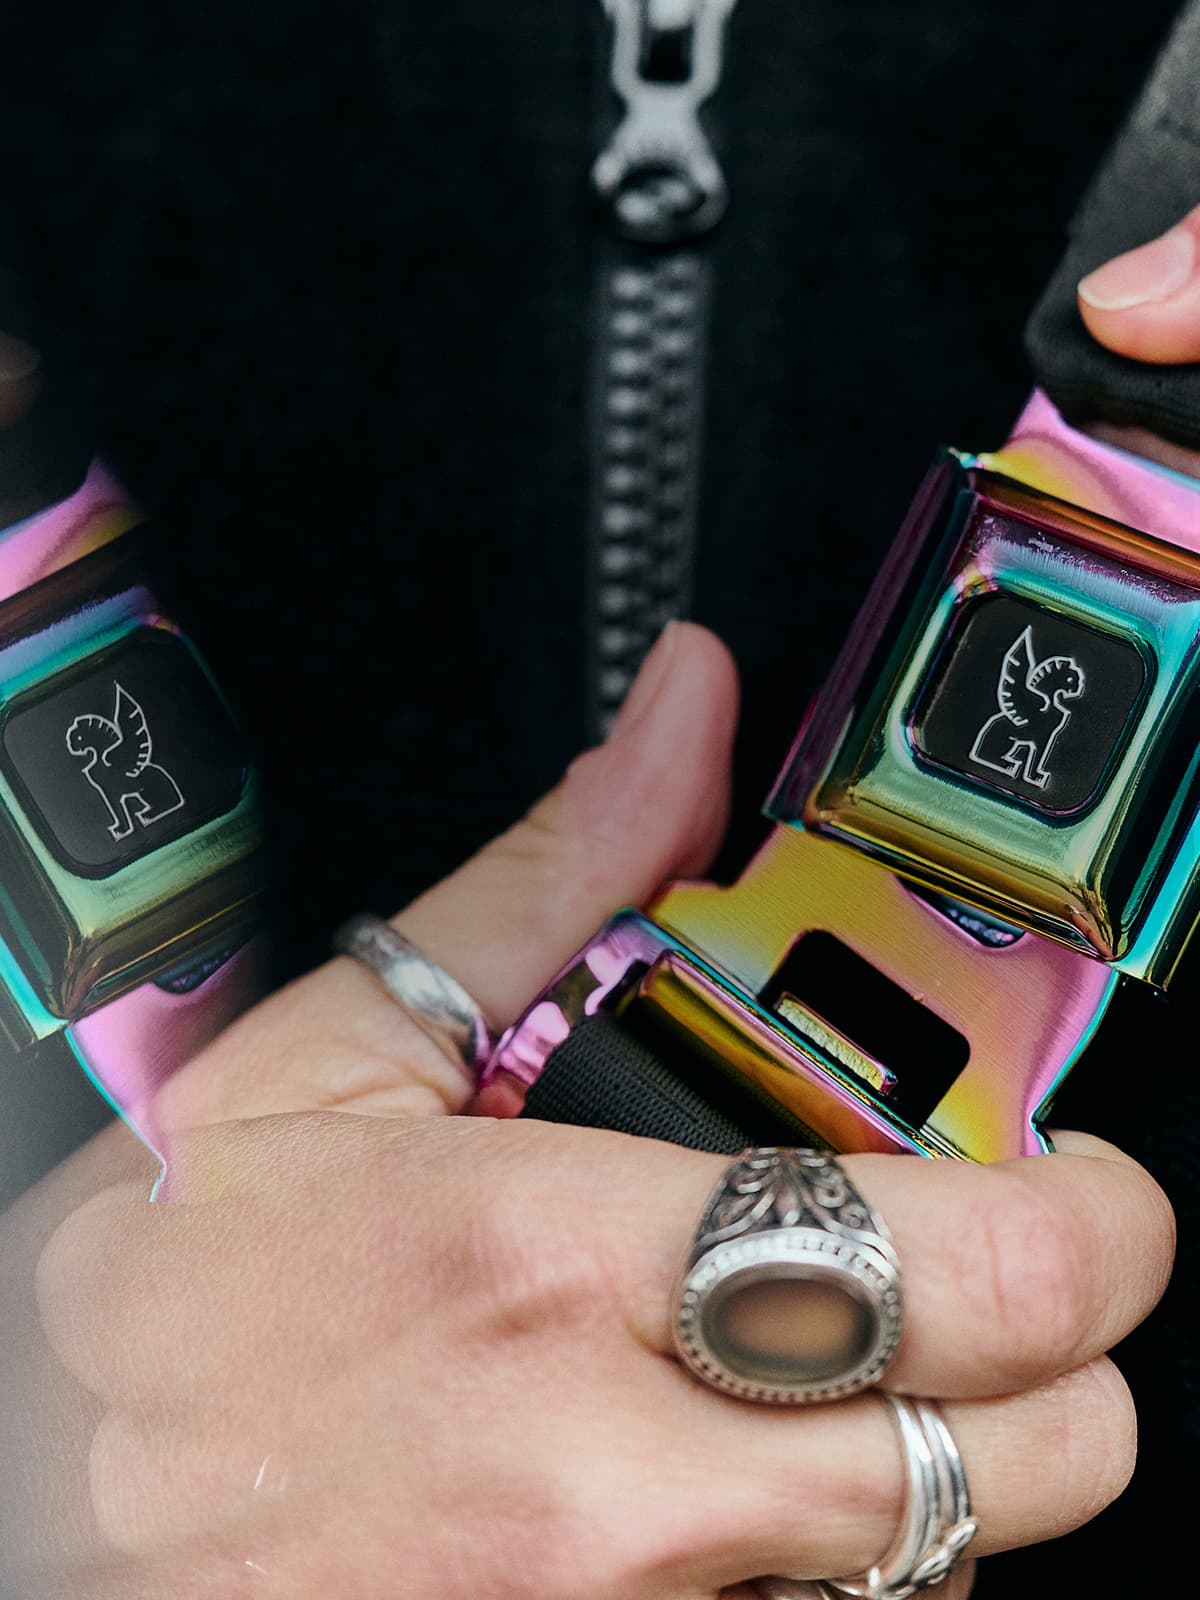 Hand grasping an iconic Chrome buckle in rainbow reflective